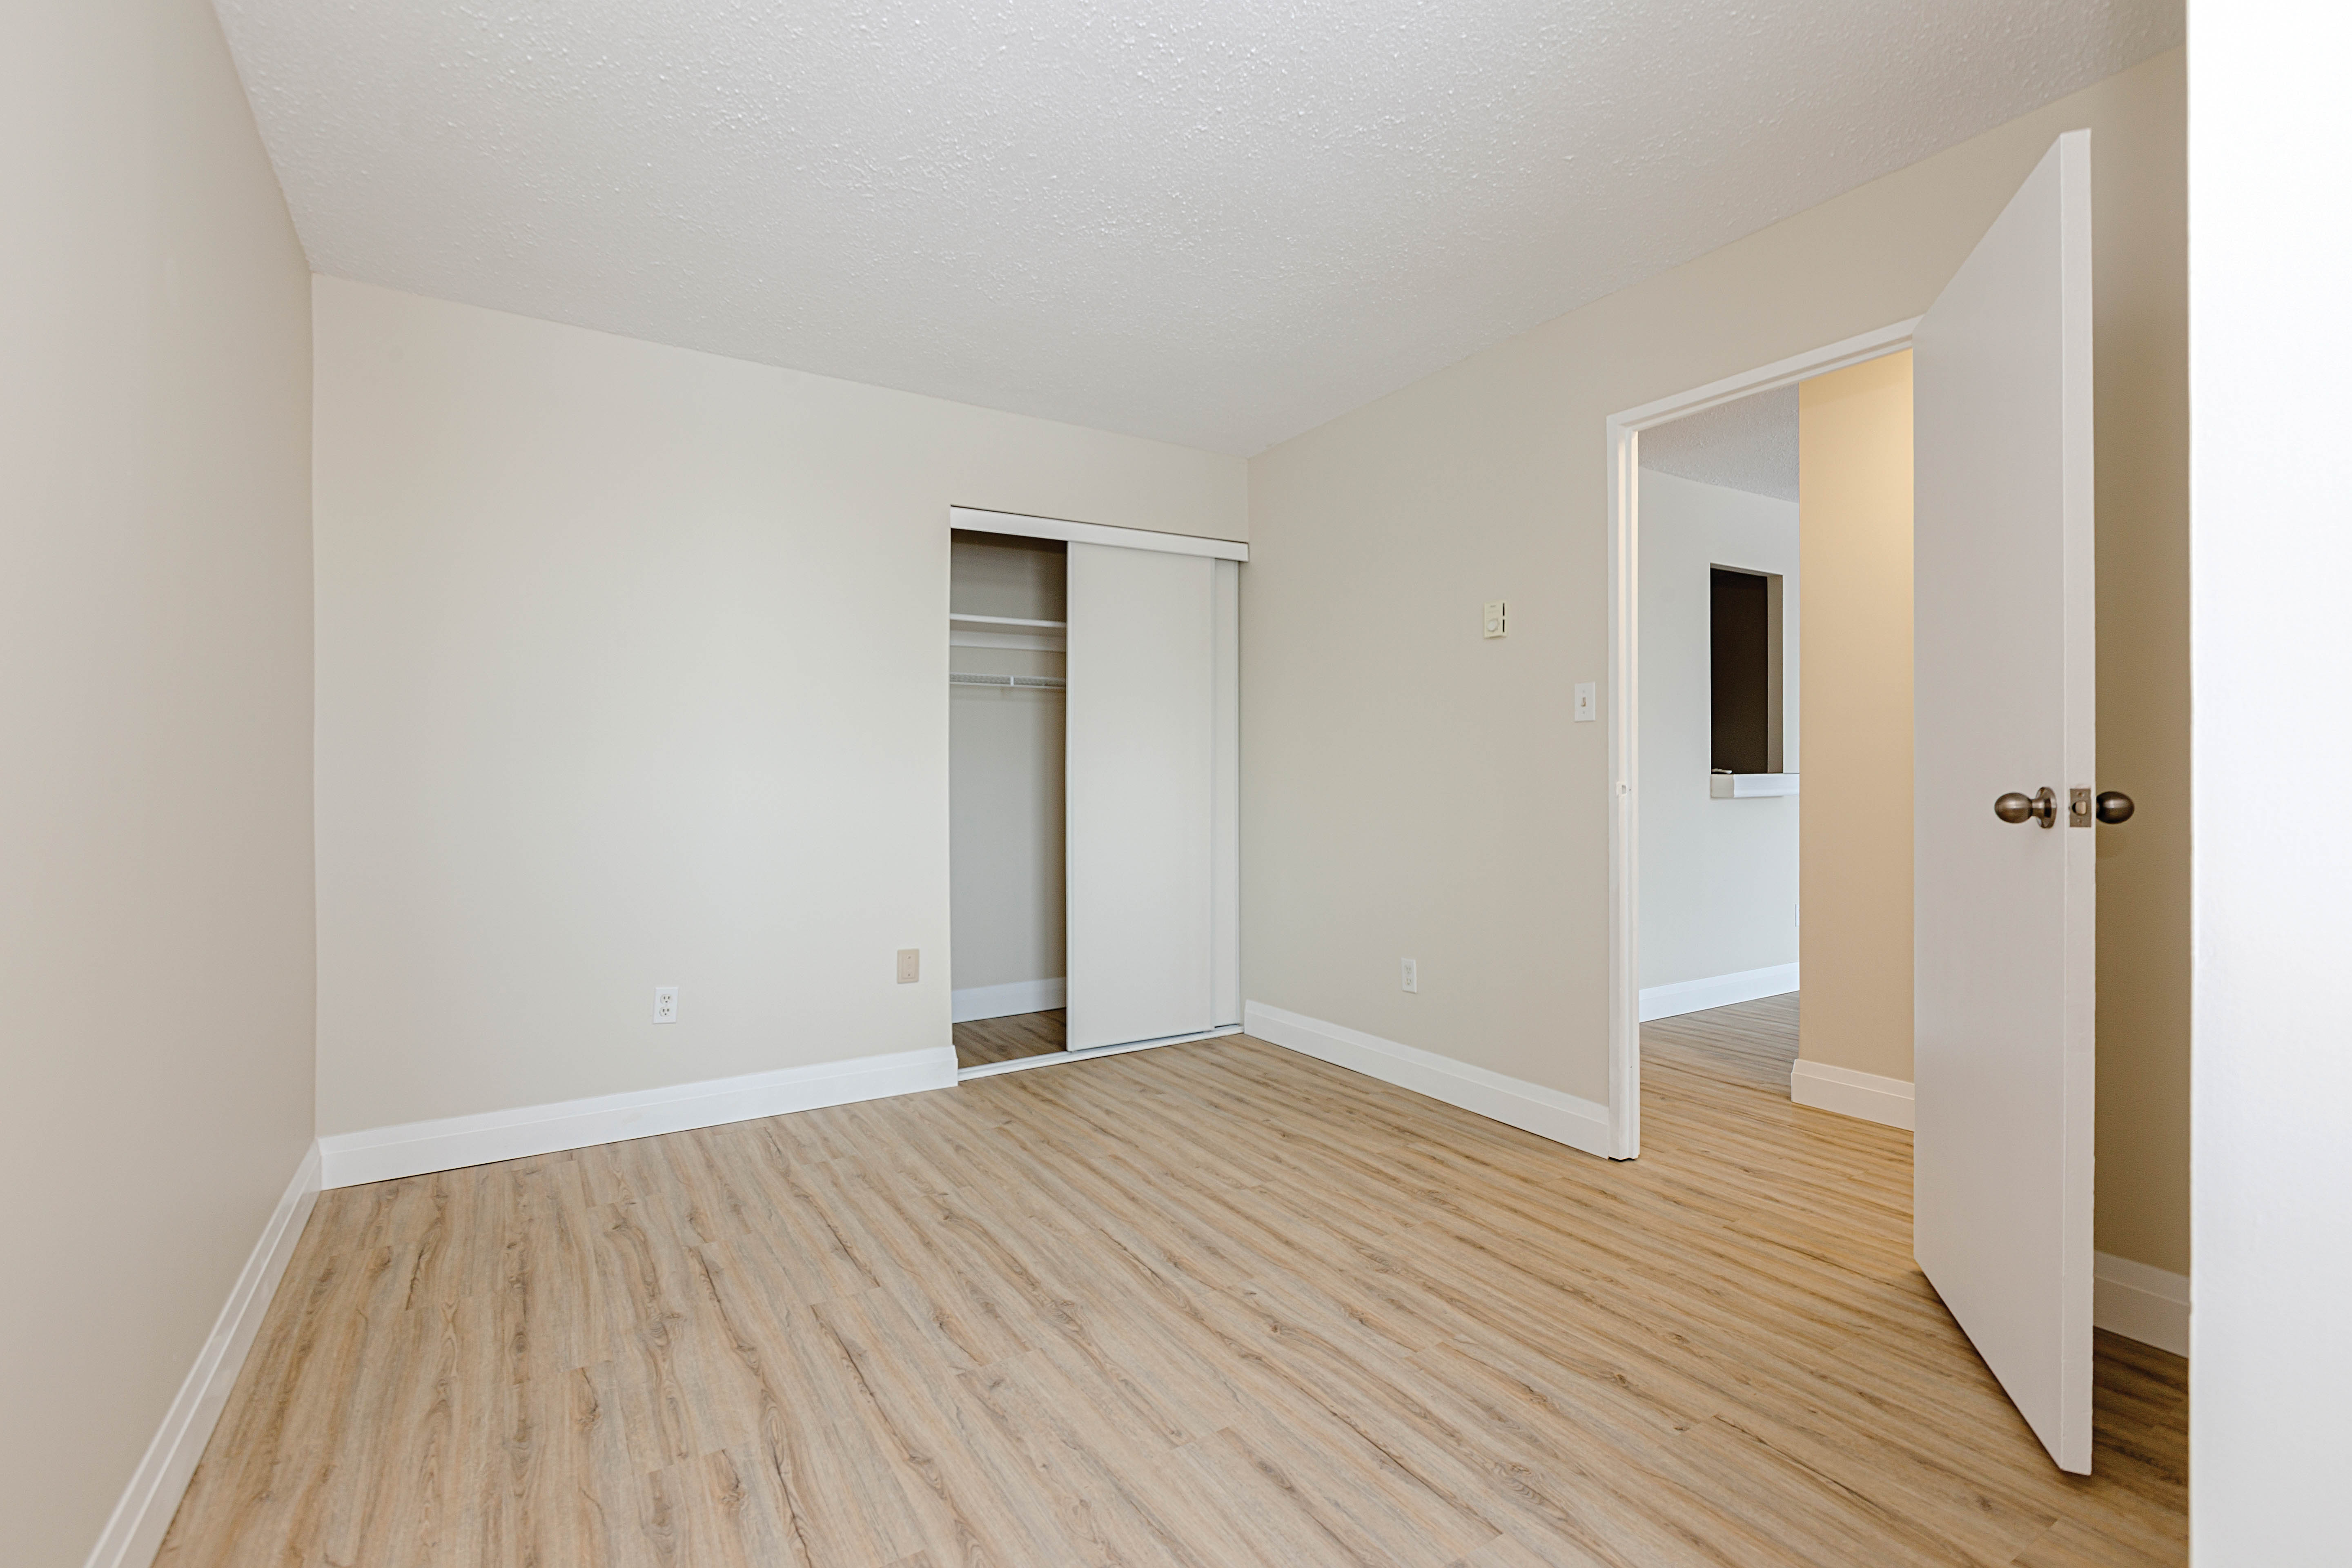 SkyLiving RiversideApartments 1214RiversideDR Timmins Unit111 TwoBed OneBath 0006 bedroom2